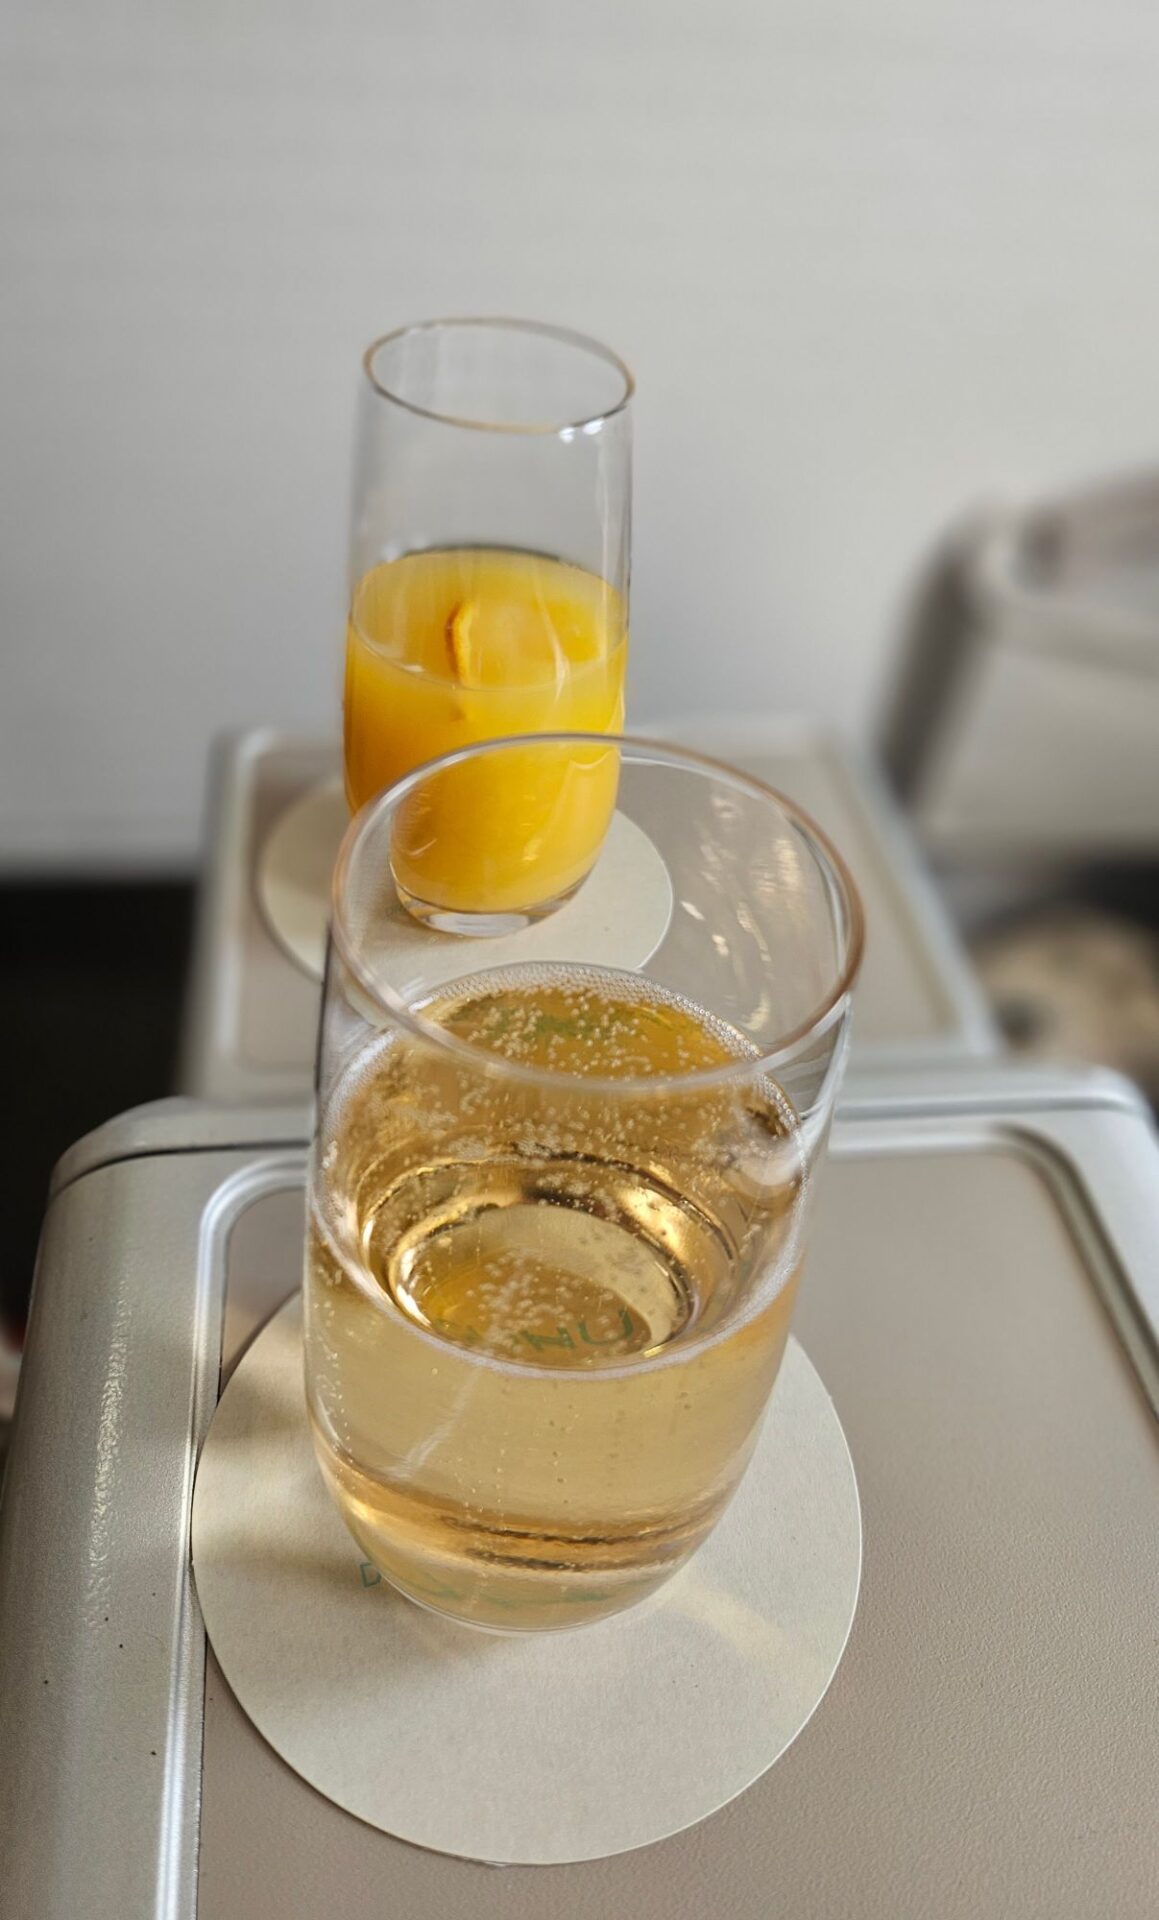 a glass of liquid and a glass of orange juice on a tray